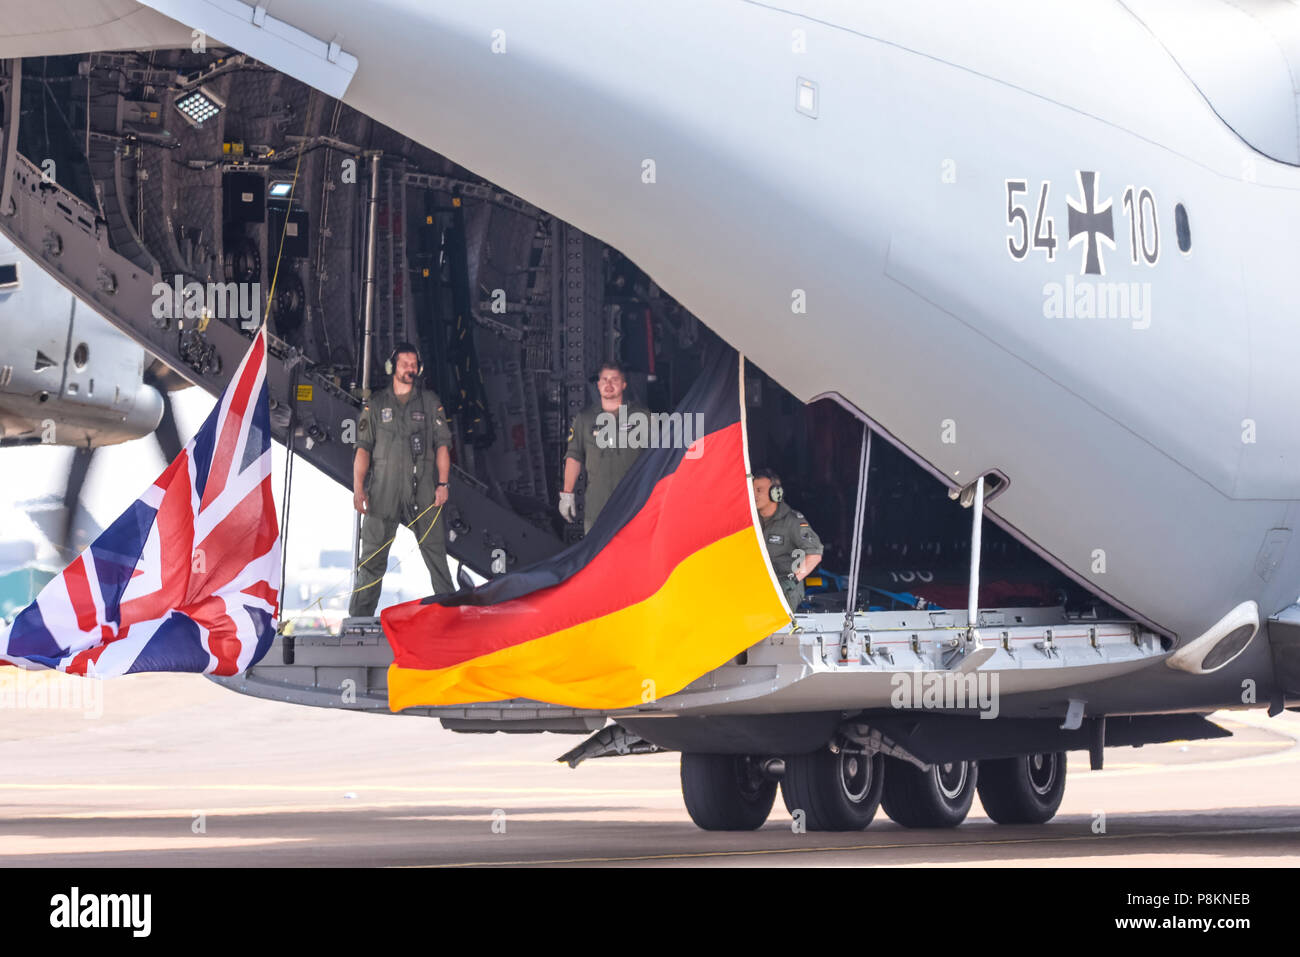 RAF Fairford, Gloucestershire, UK. 12th July 2018. The Royal International Air Tattoo. German Air Force crew flying flags Stock Photo